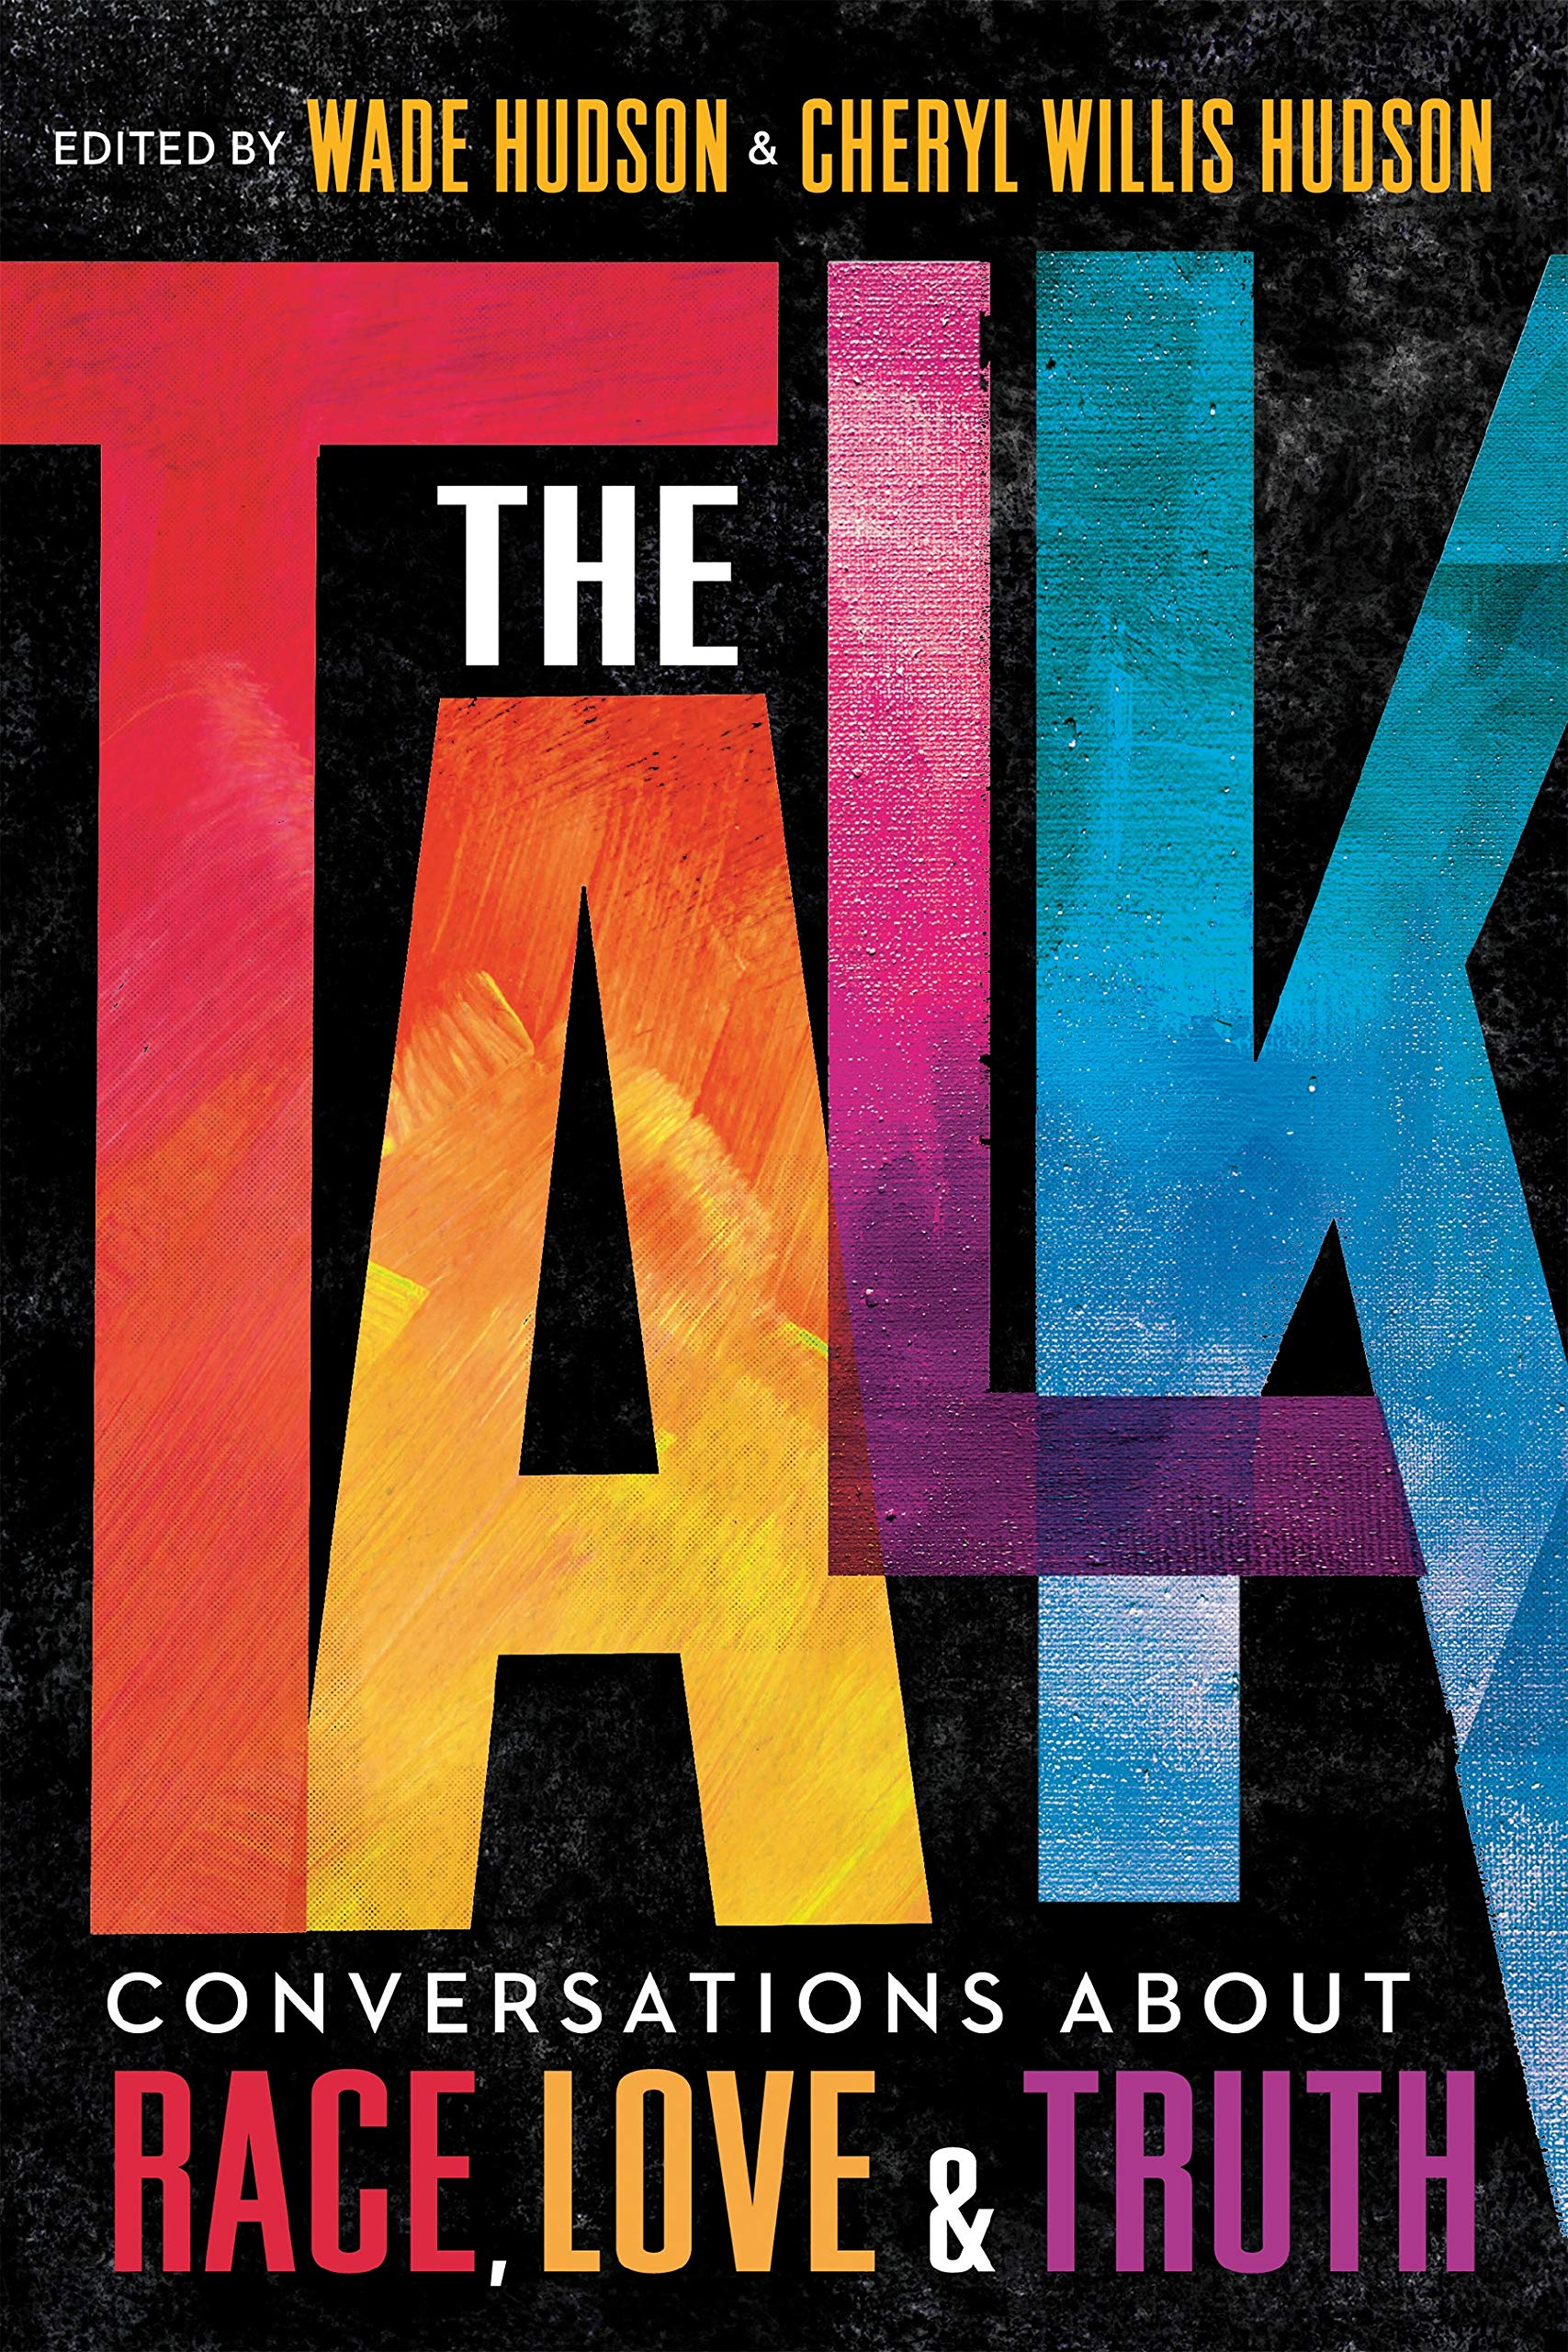 The Talk: Conversations About Race, Love & Truth by Wade Hudson and Cheryl Willis Hudson (ed.)